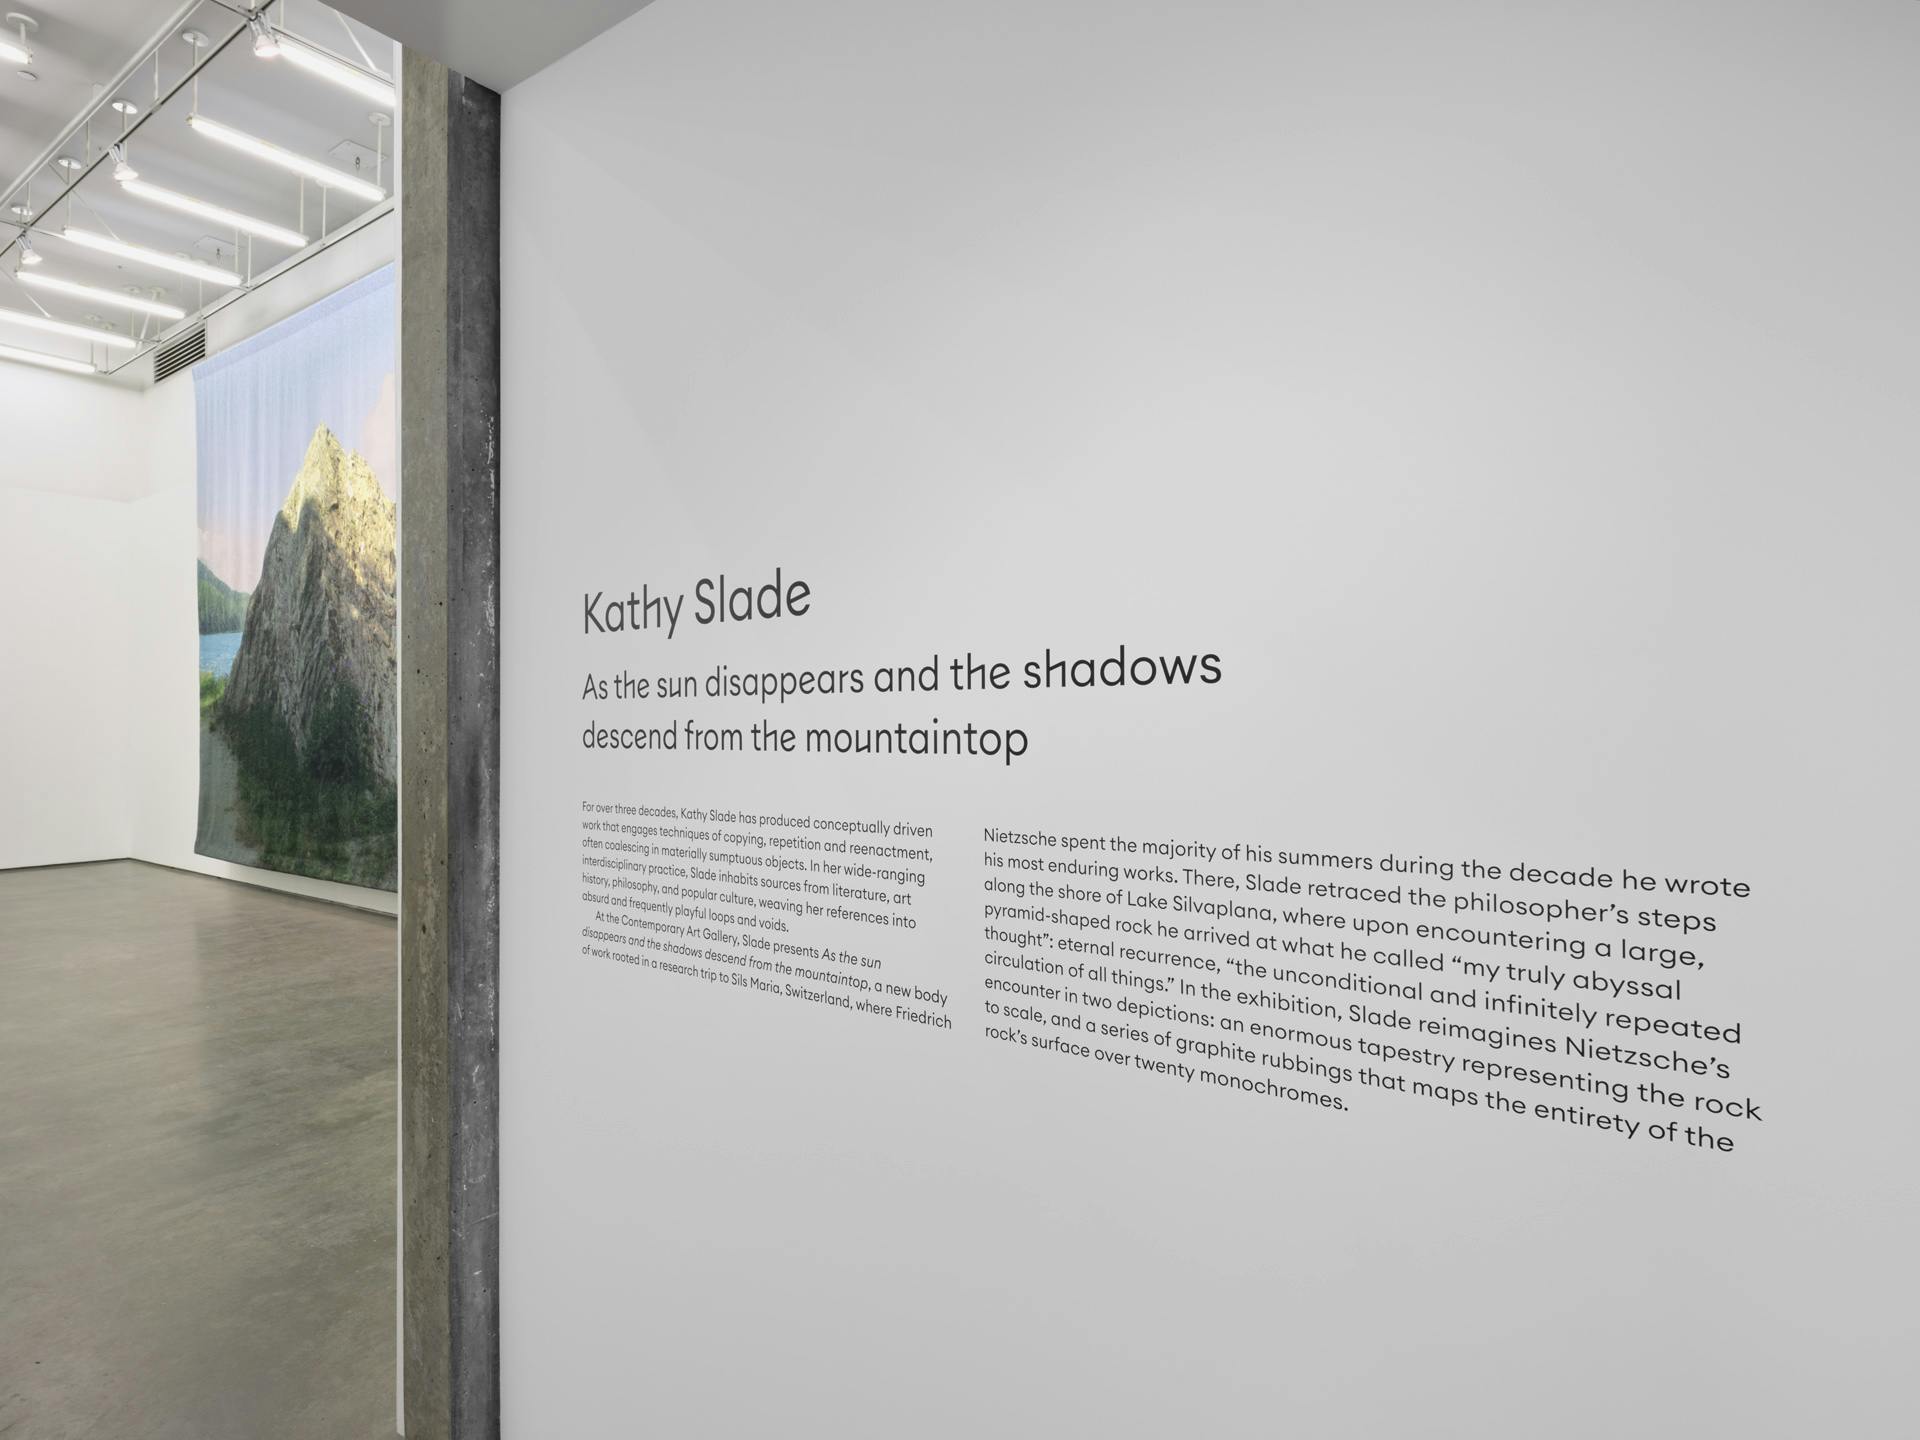 A very large tapestry by Kathy Slade depicting a large rock, visible in a gallery behind a title wall showing the exhibition's title and artist's name.